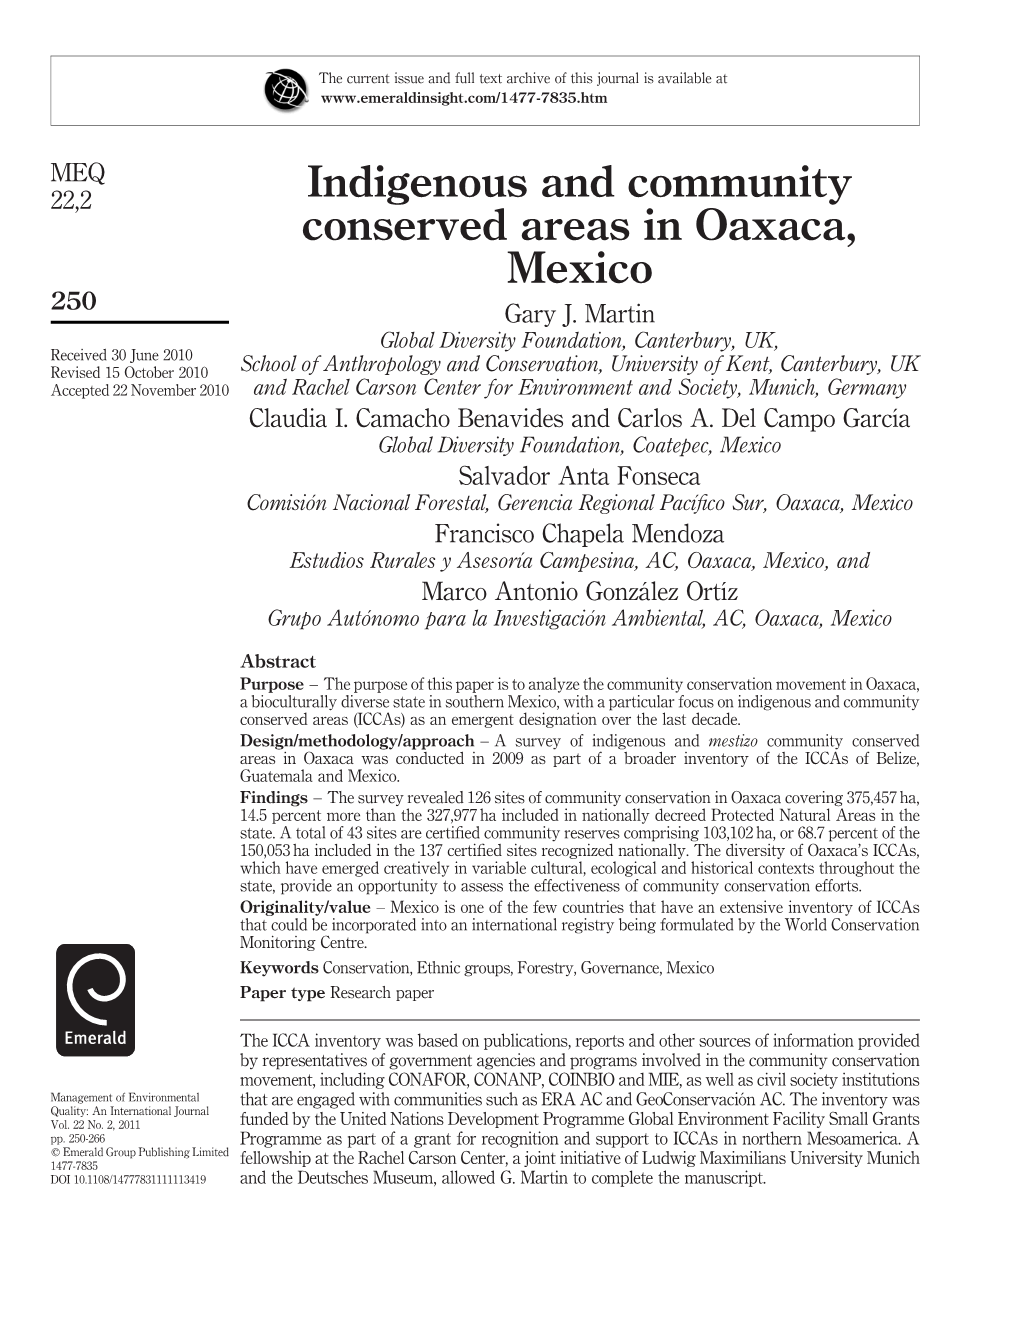 Indigenous and Community Conserved Areas in Oaxaca, Mexico 250 Gary J